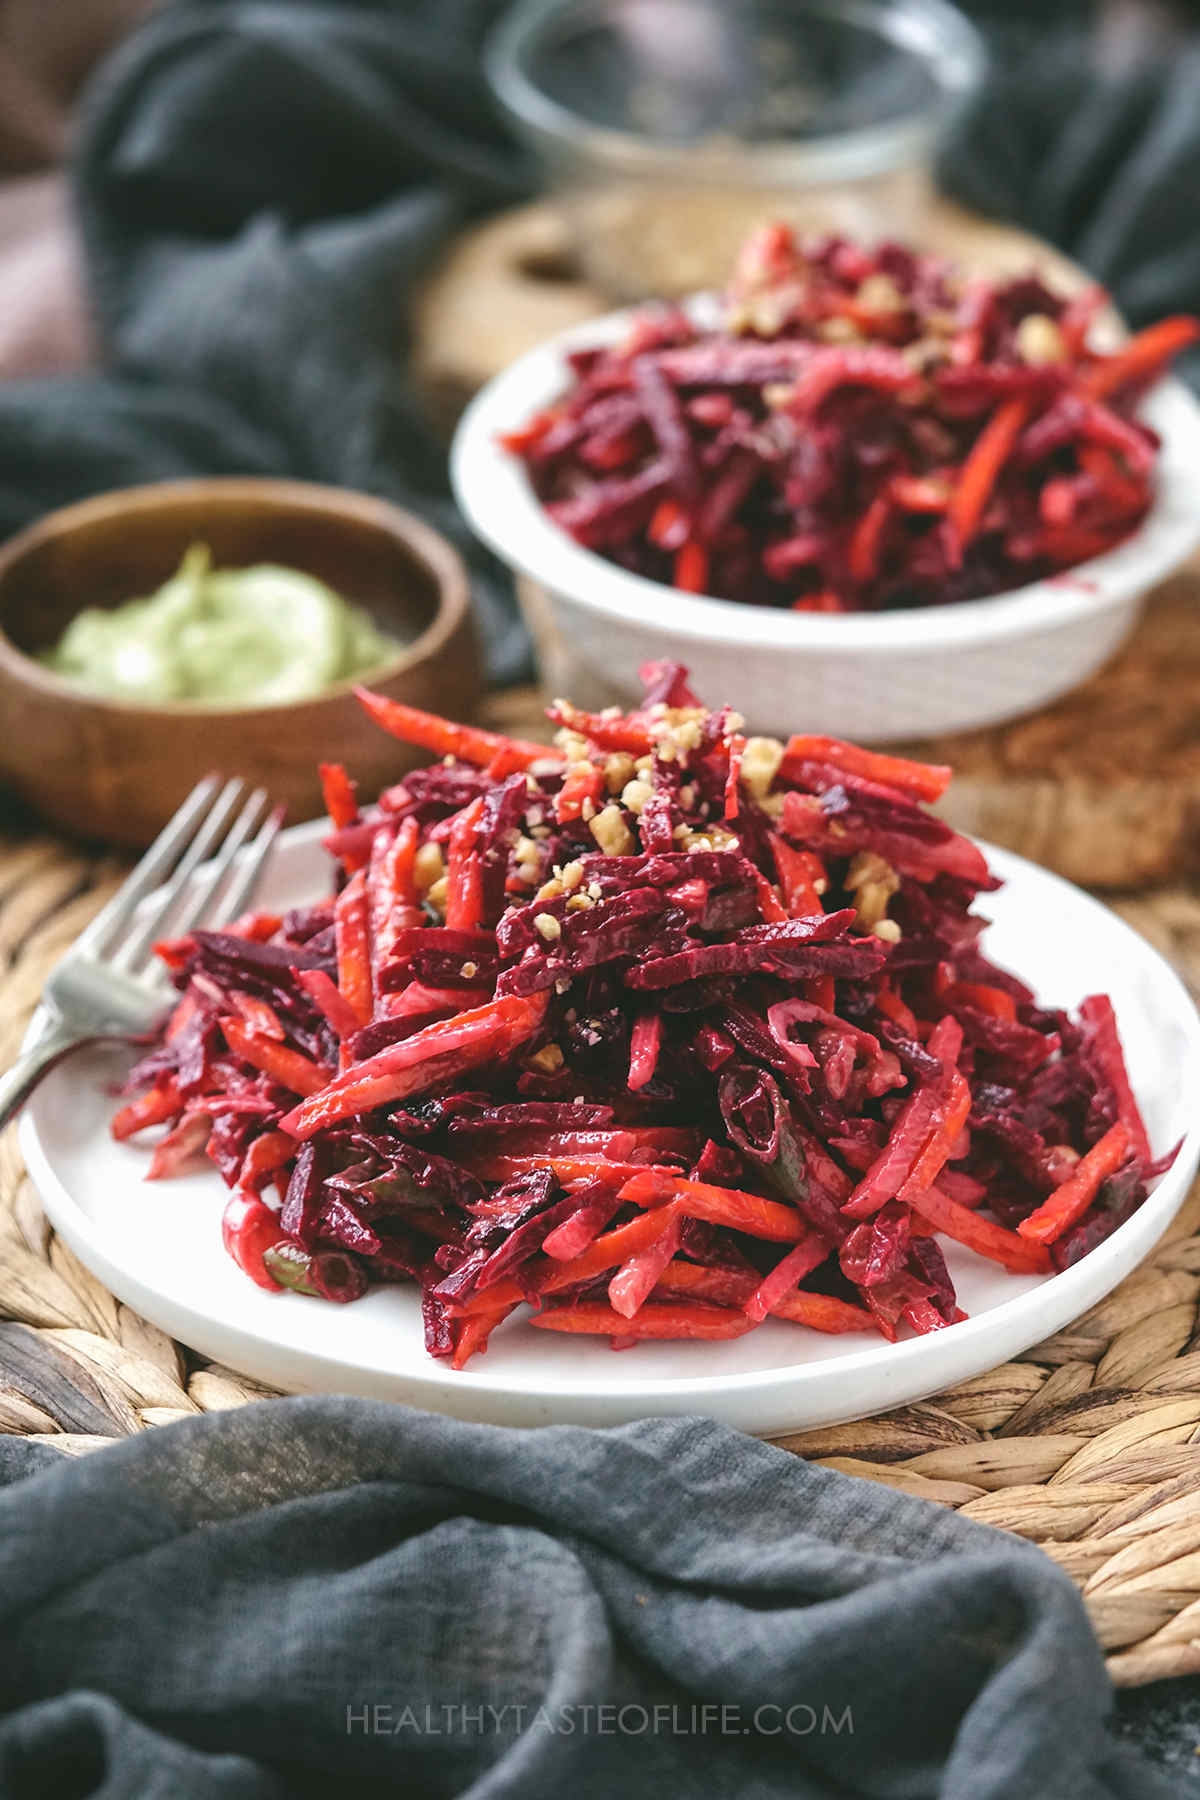 Beetroot carrot salad on a plate.